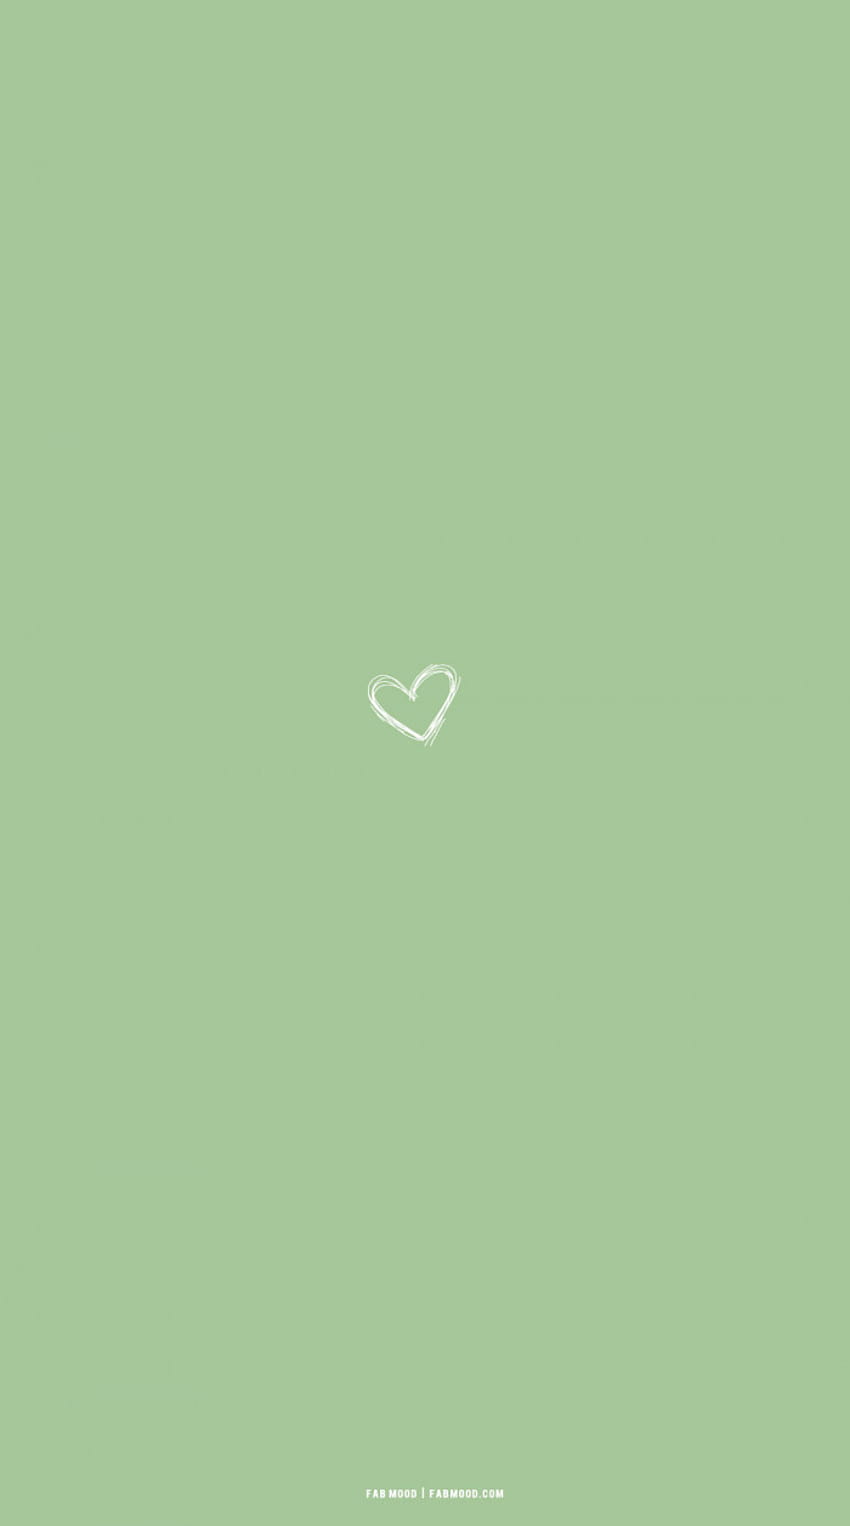 20 Cute Spring for Phone & Iphone : Heart Sage Green Backgrounds 1, sage aesthetic HD phone wallpaper